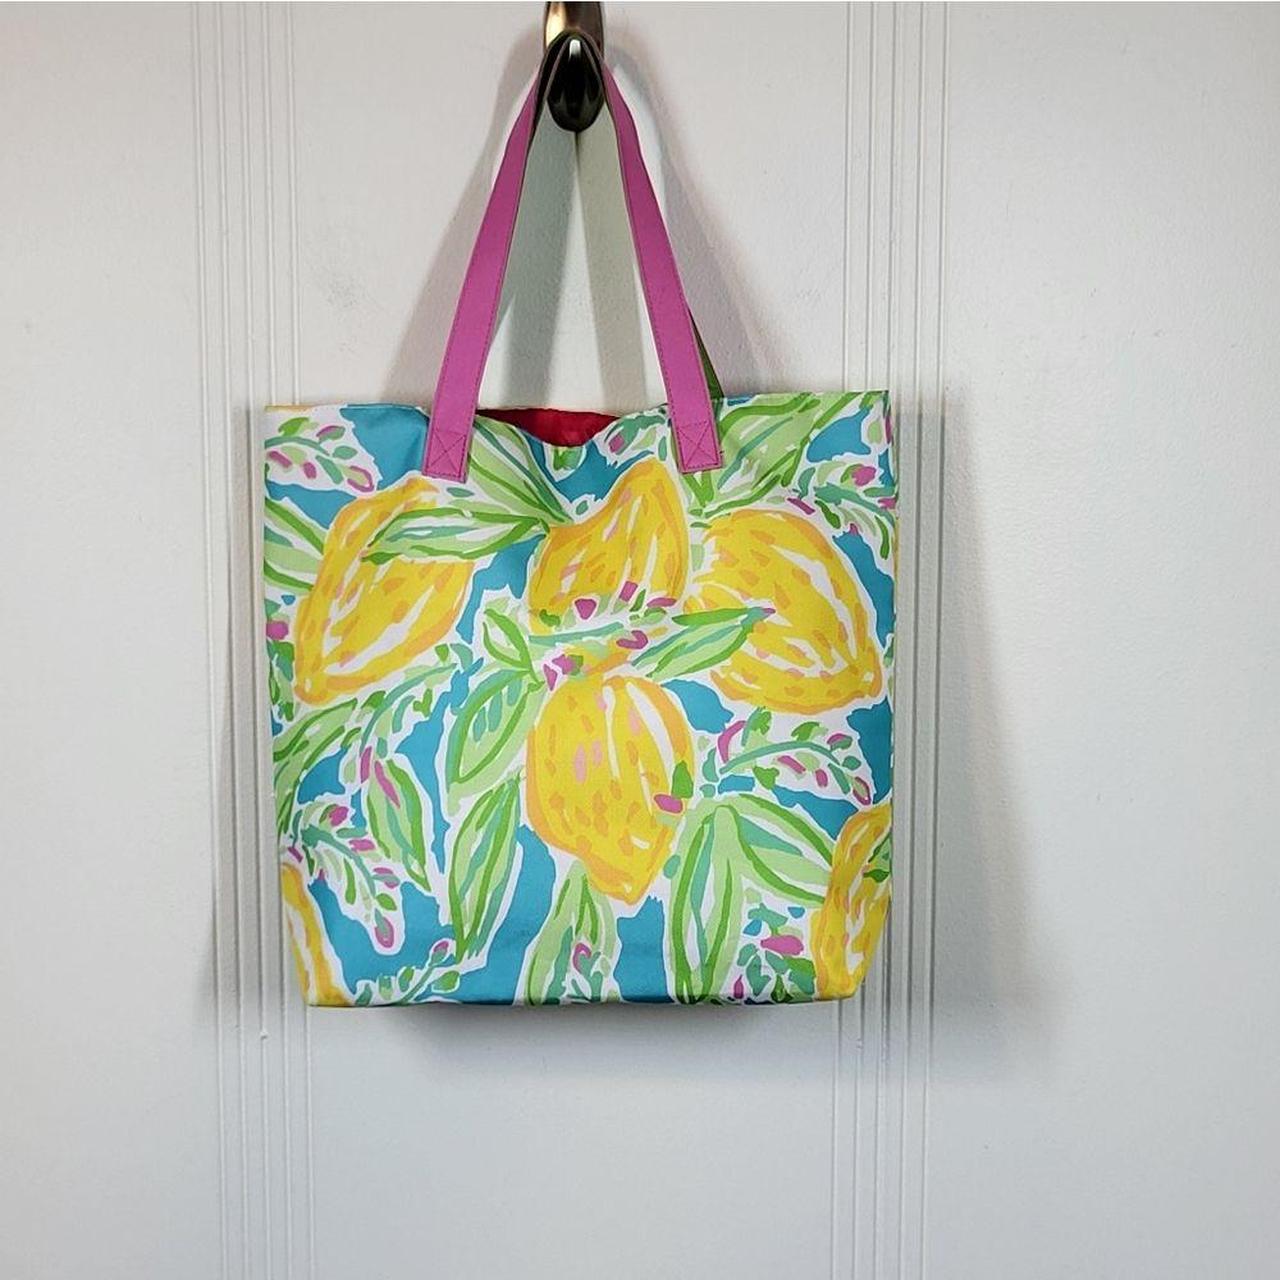 Lilly Pulitzer Women's Pink and Green Bag (4)